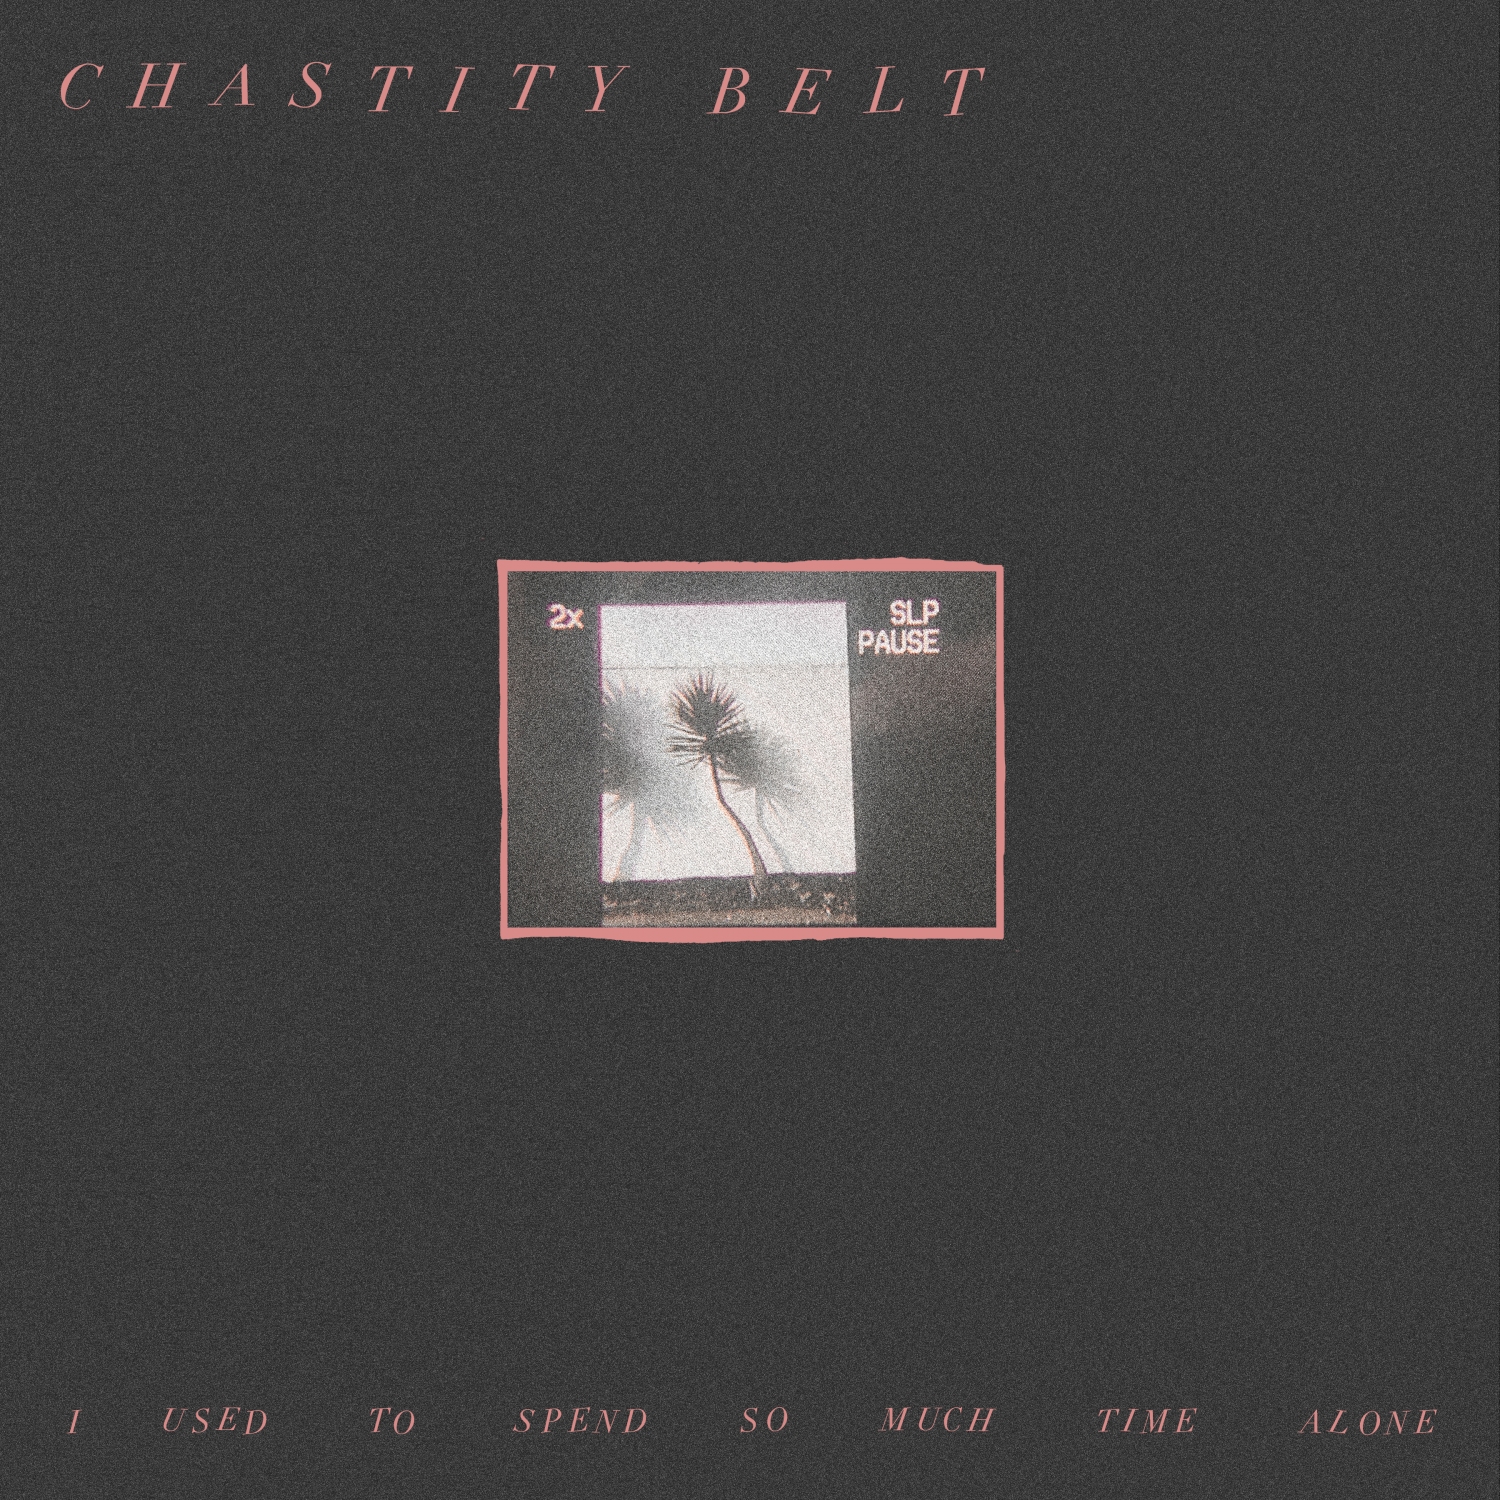 Video: Chastity Belt - "I Used To Spend"